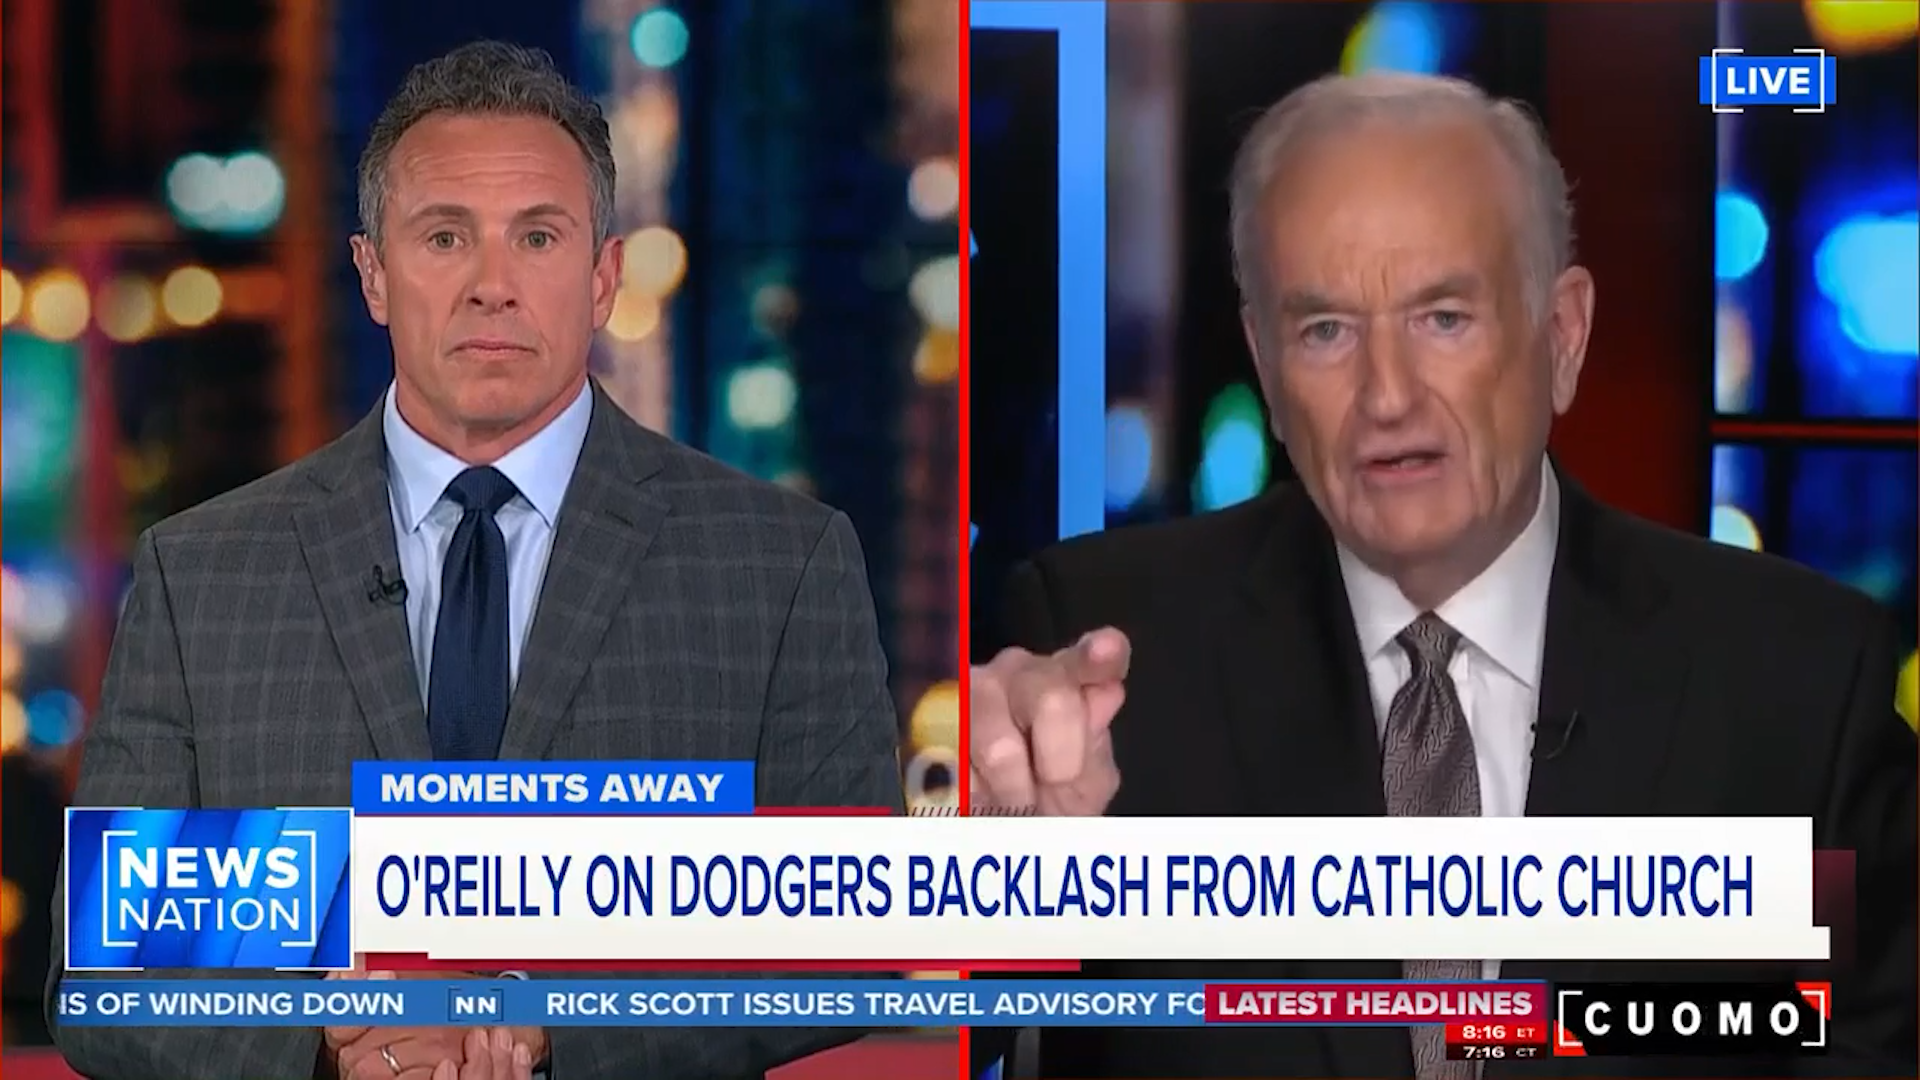 O'Reilly Rips Dodgers on 'CUOMO', Asks Christians to 'Speak Up'